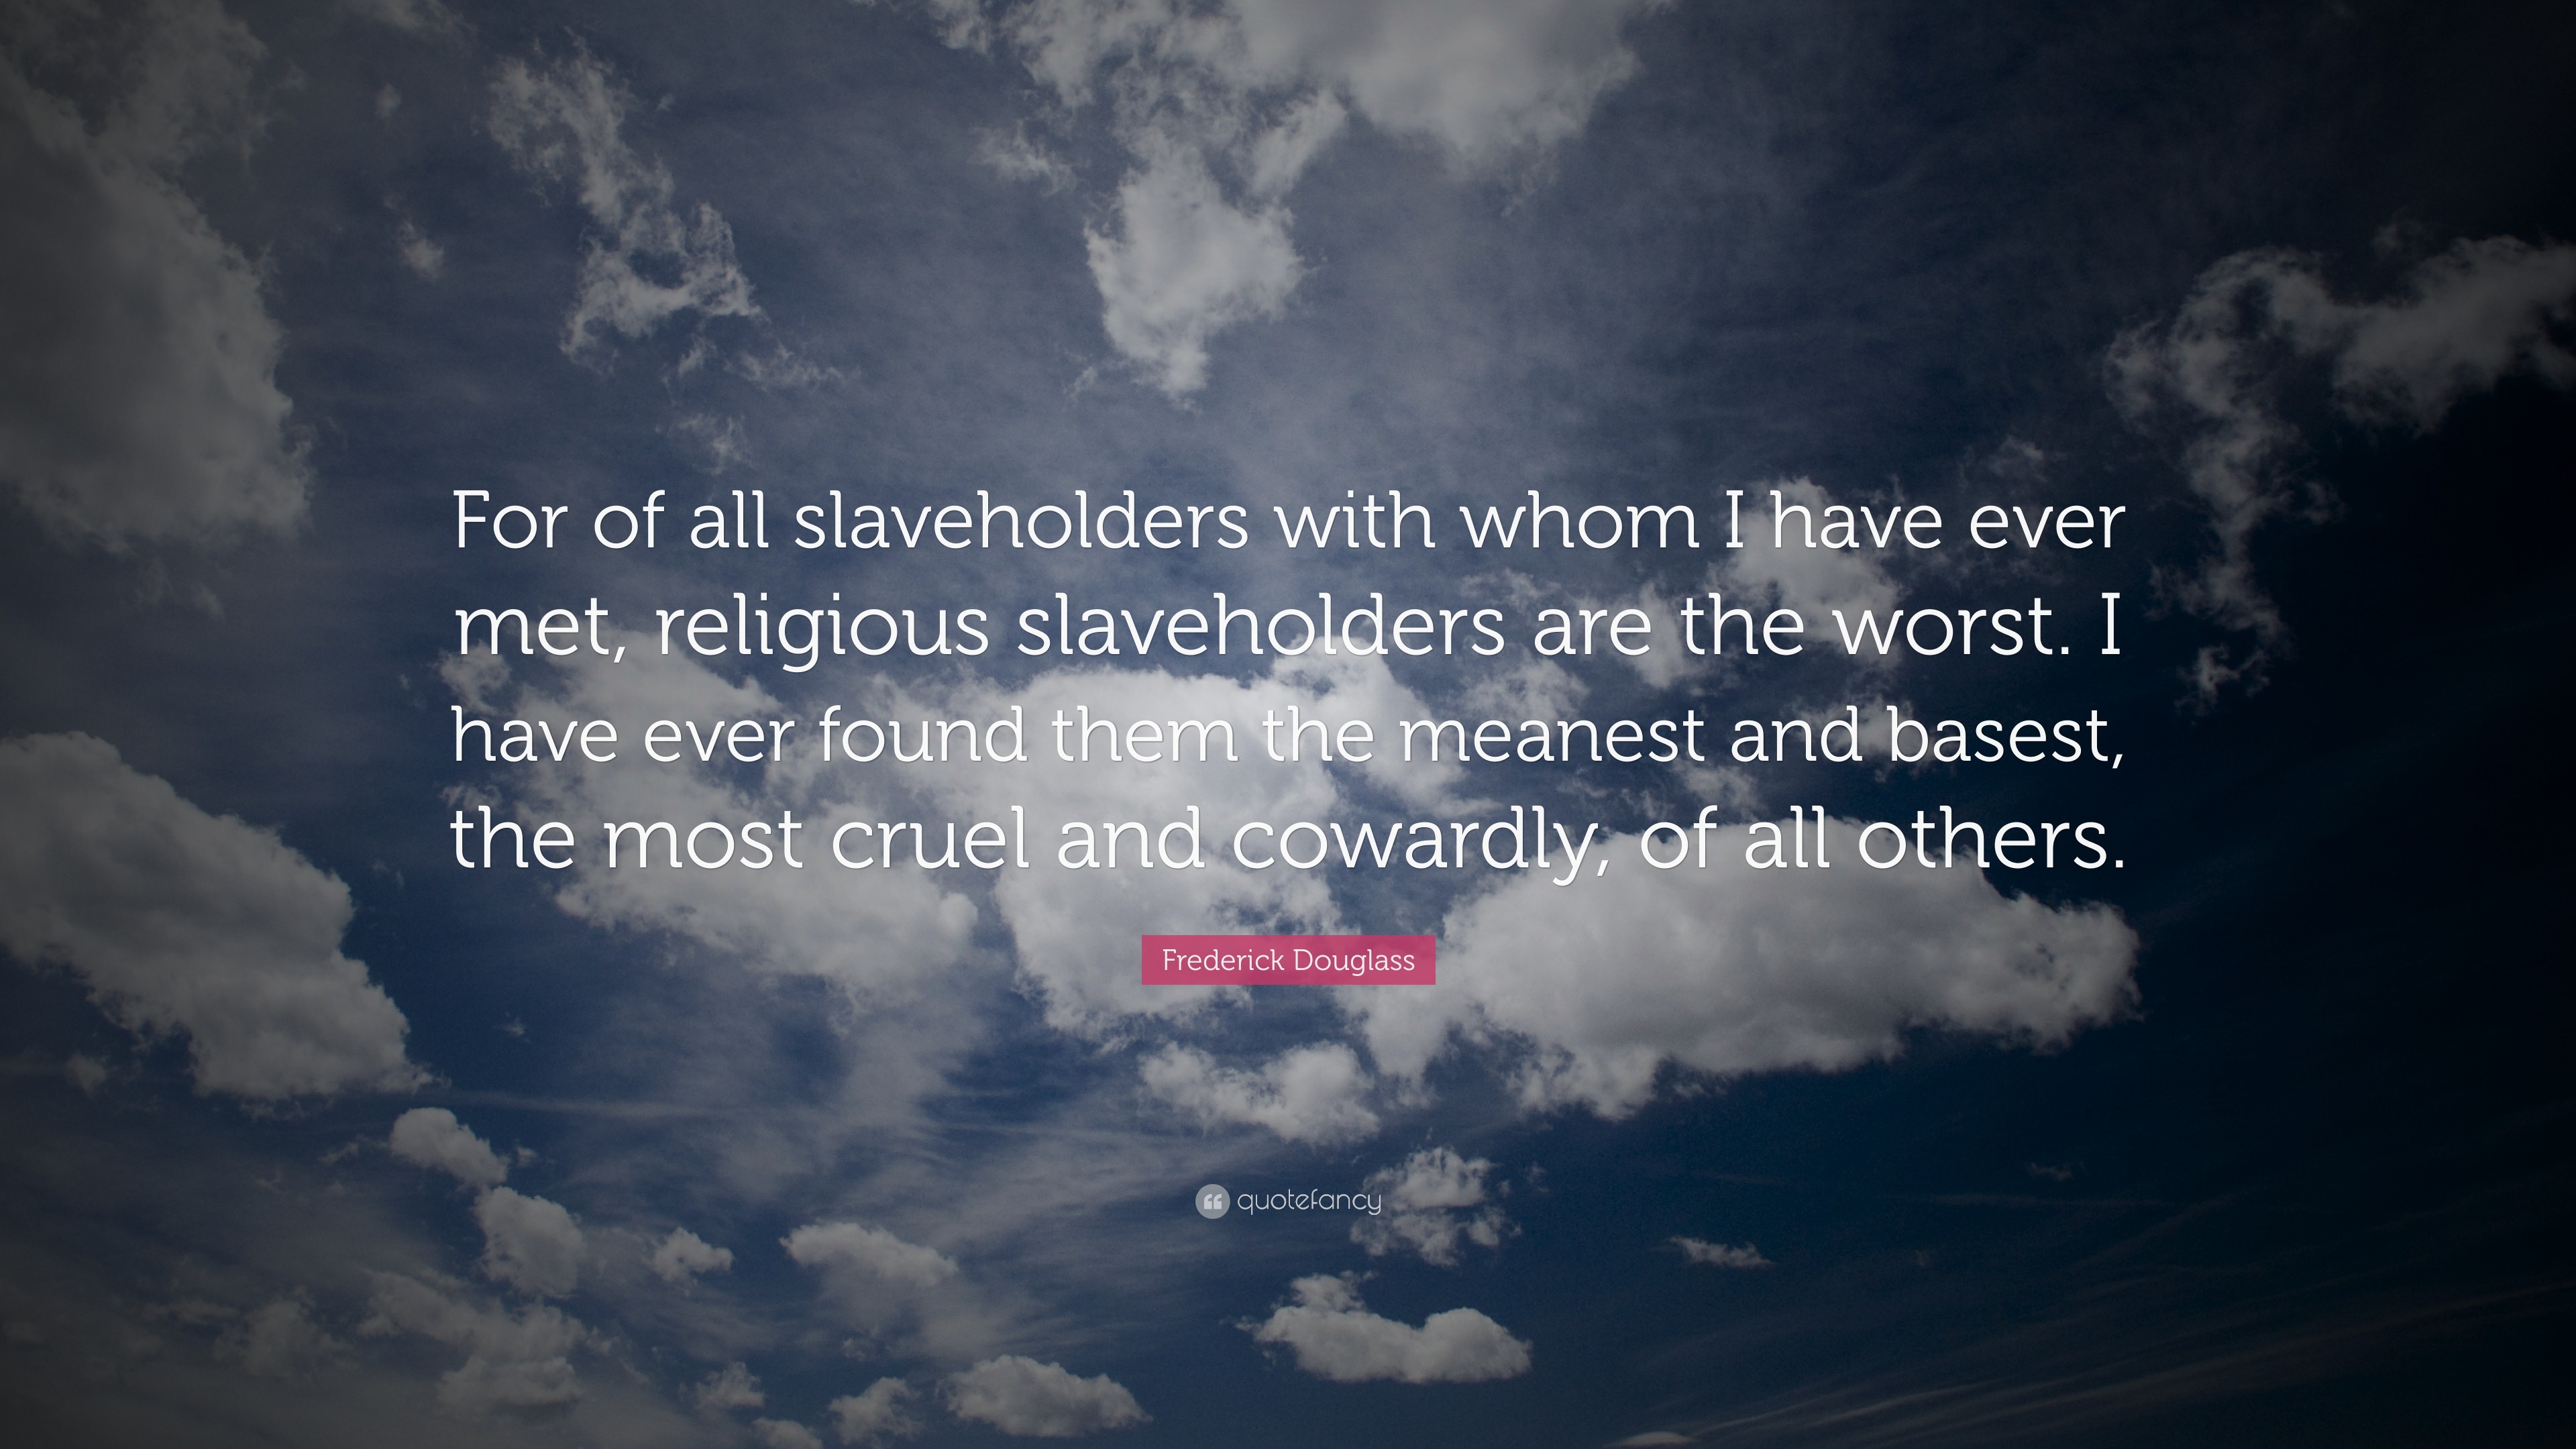 3840x2160 Frederick Douglass Quote: “For of all slaveholders with whom I have ever  met,